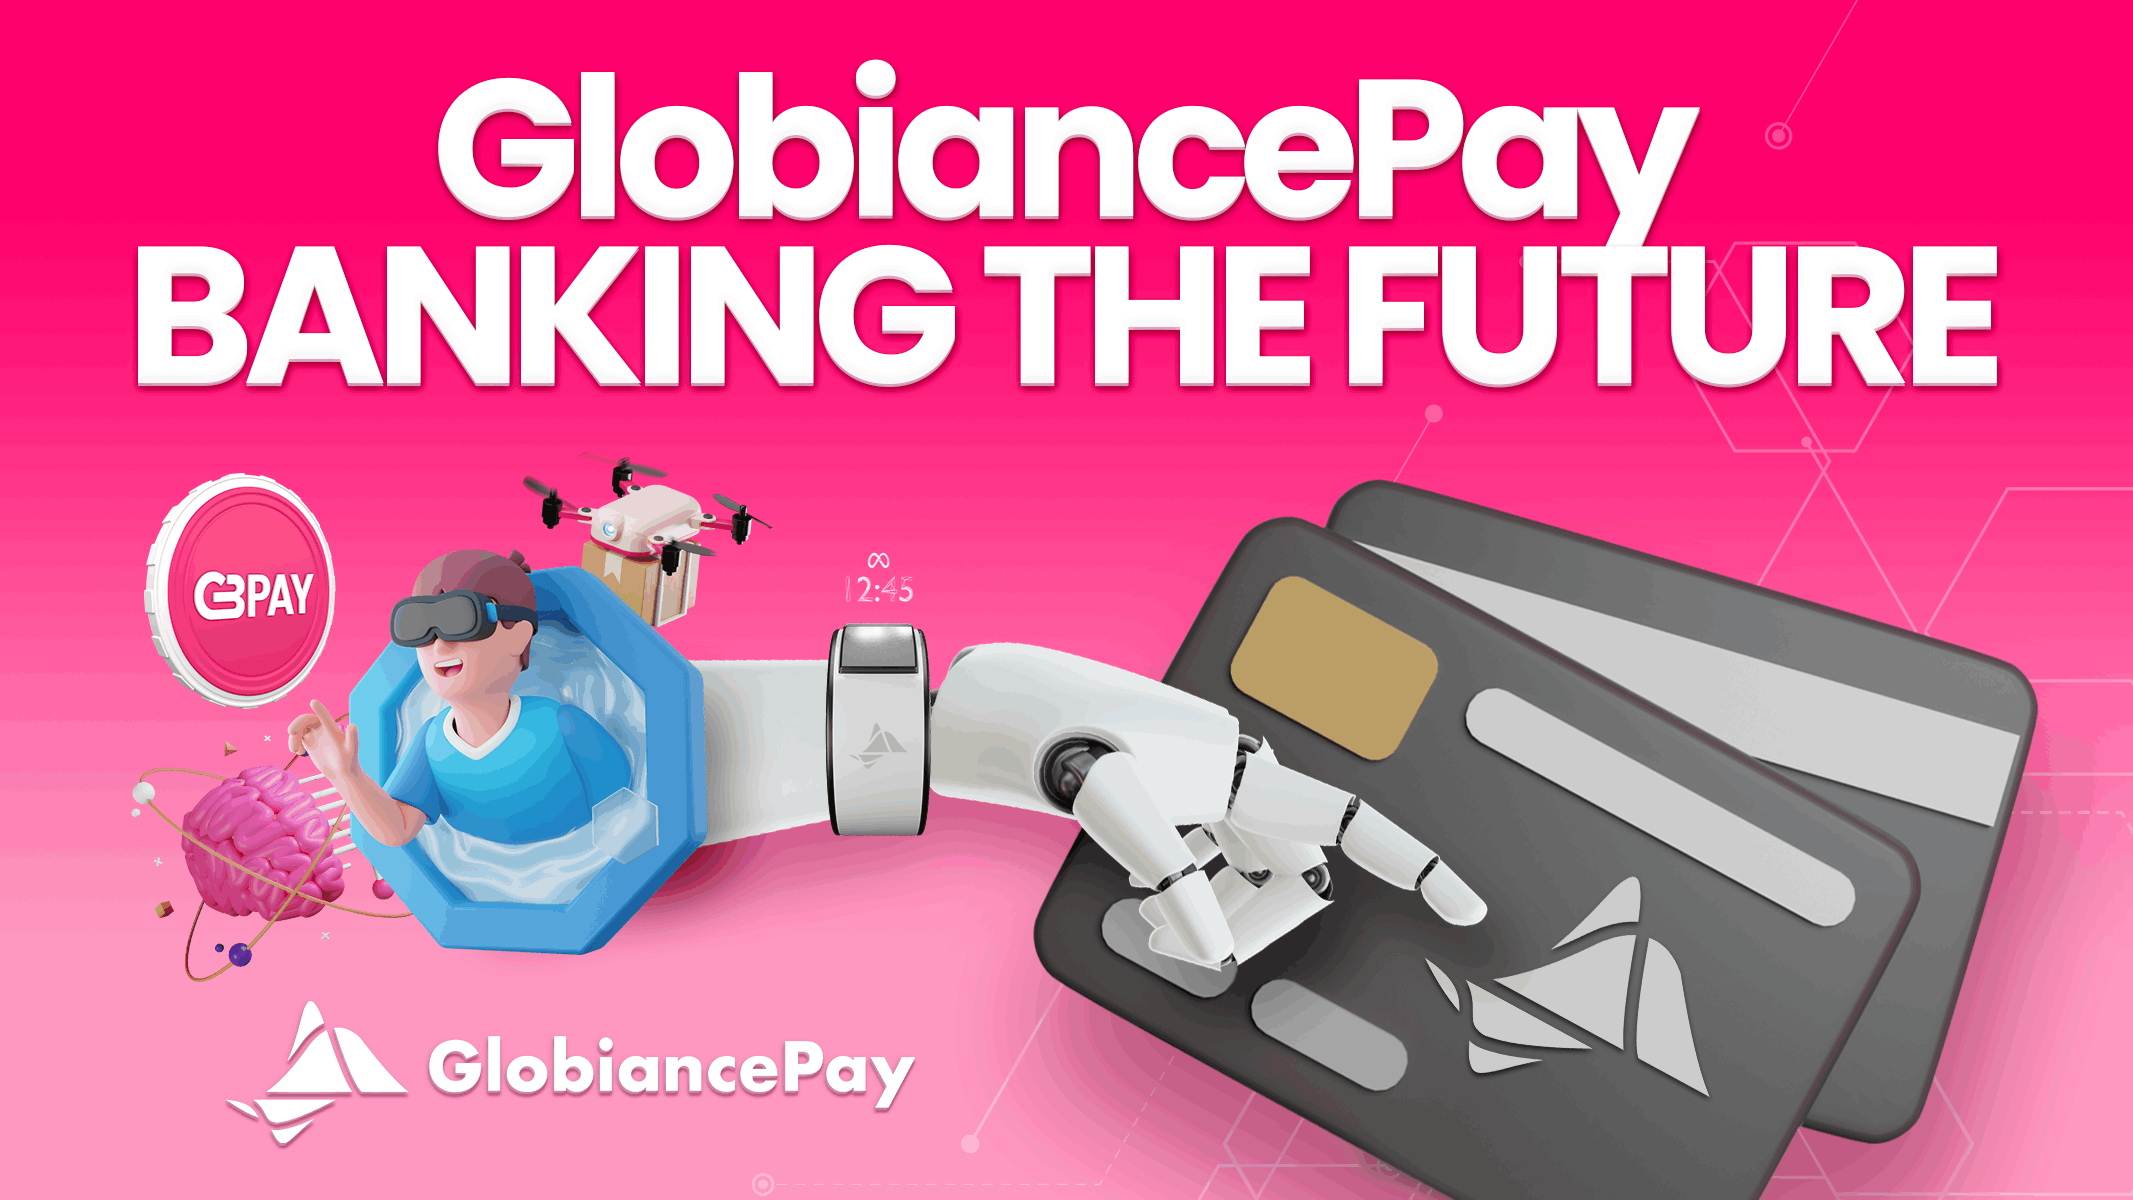 Globiance Crypto Payment Gateway: The Future of Digital Transactions